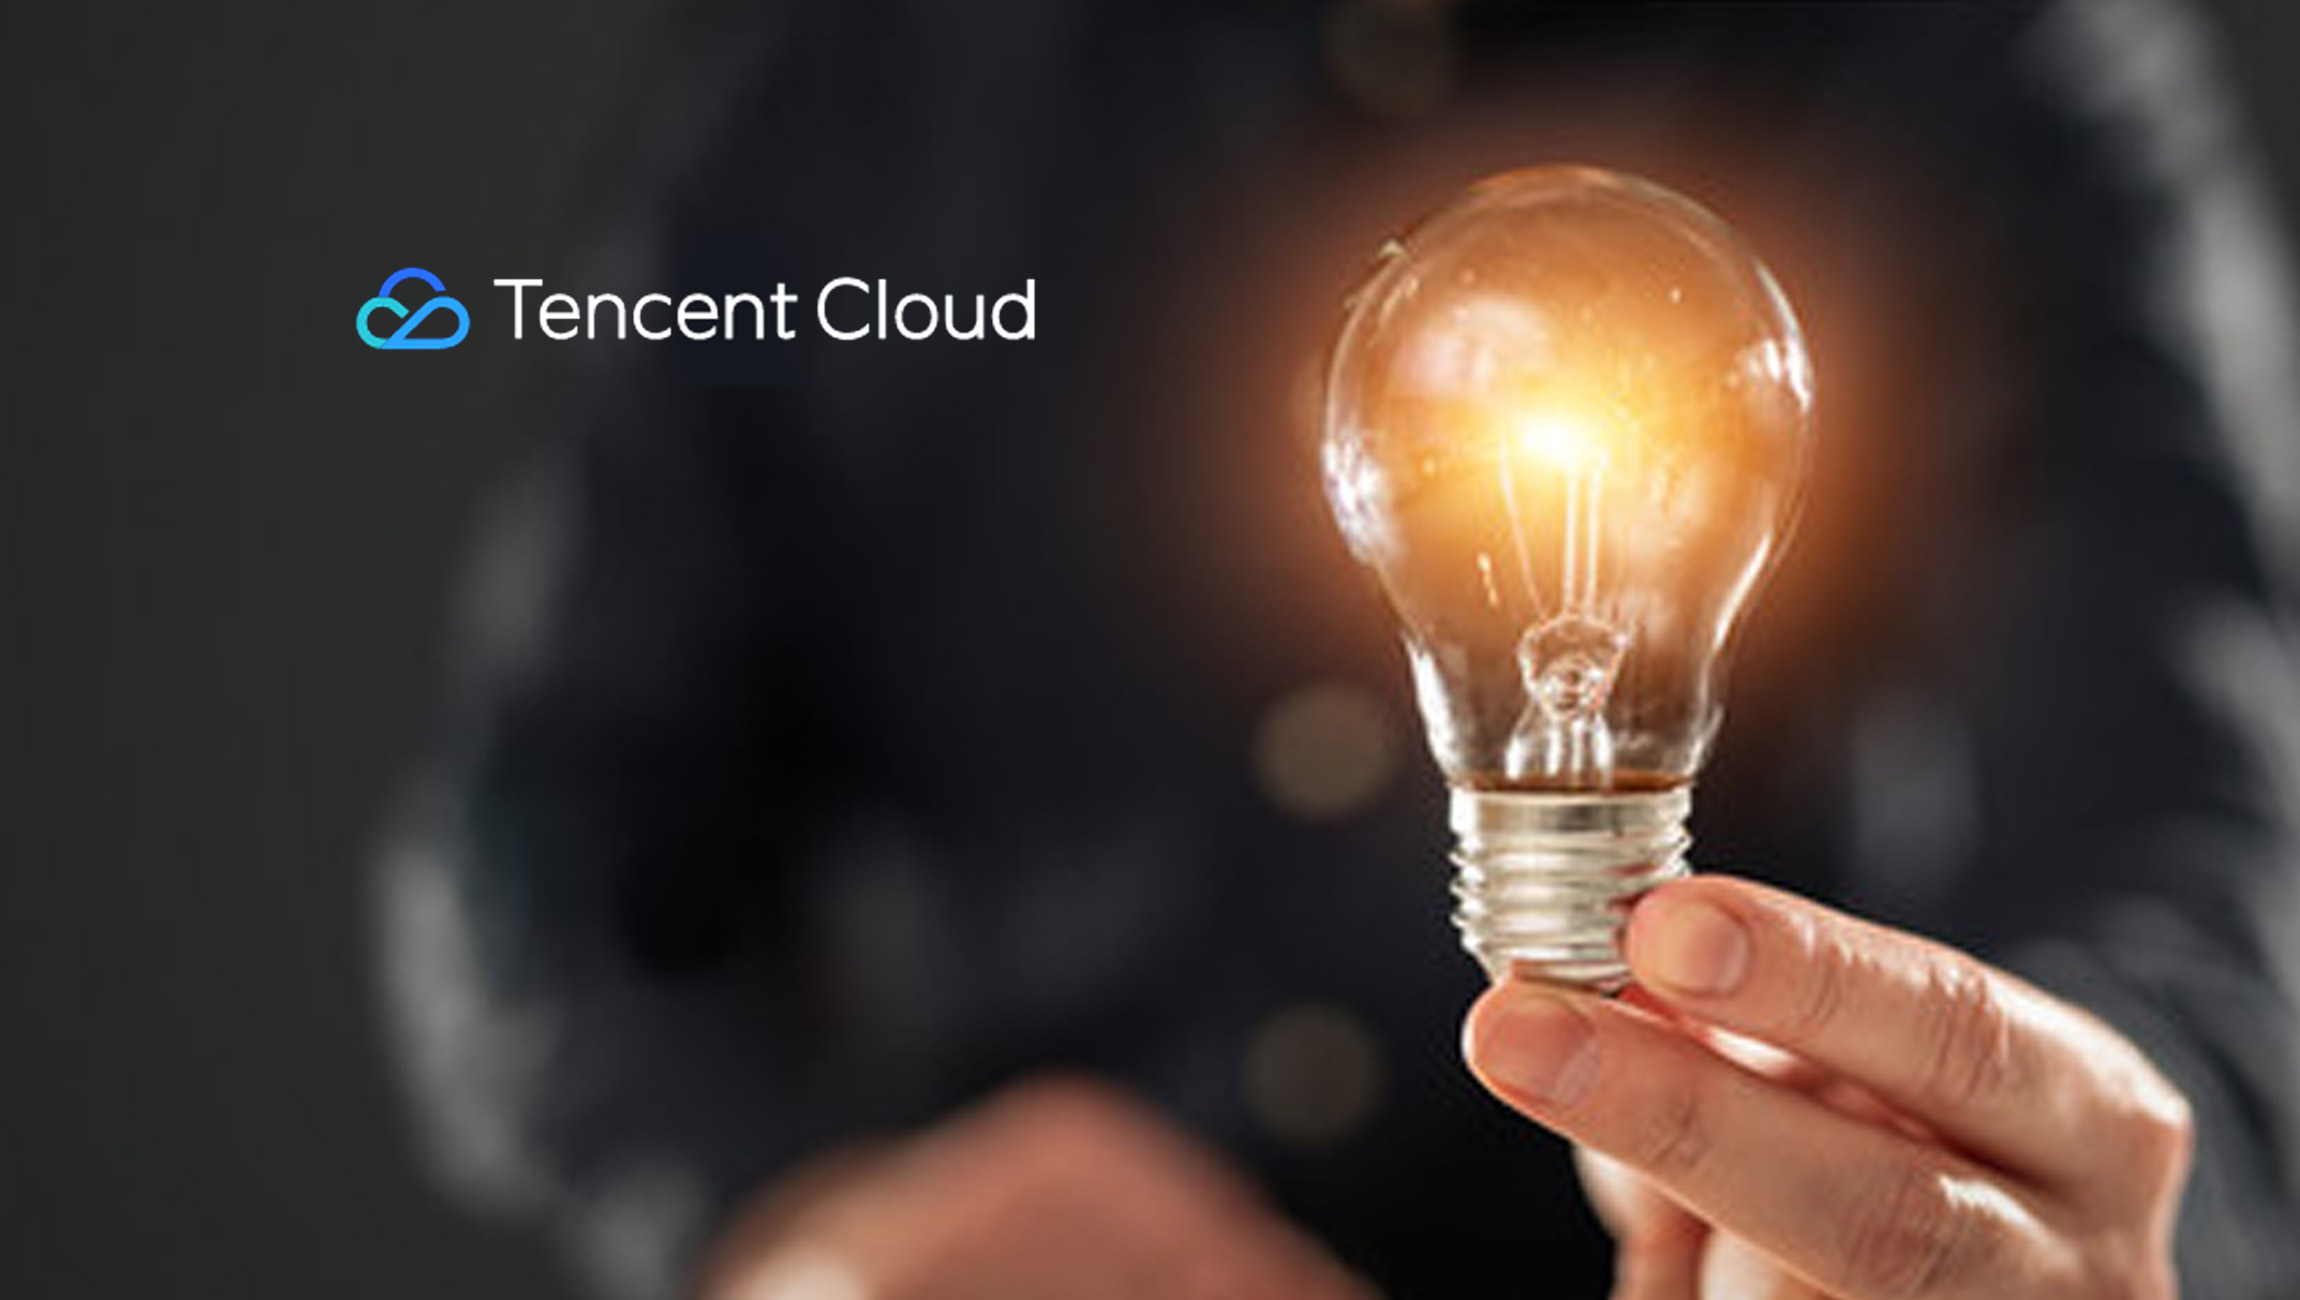 Tencent Cloud Powers Up Korean Application Mall ONE Store To Make Mobile Games Playable on PC